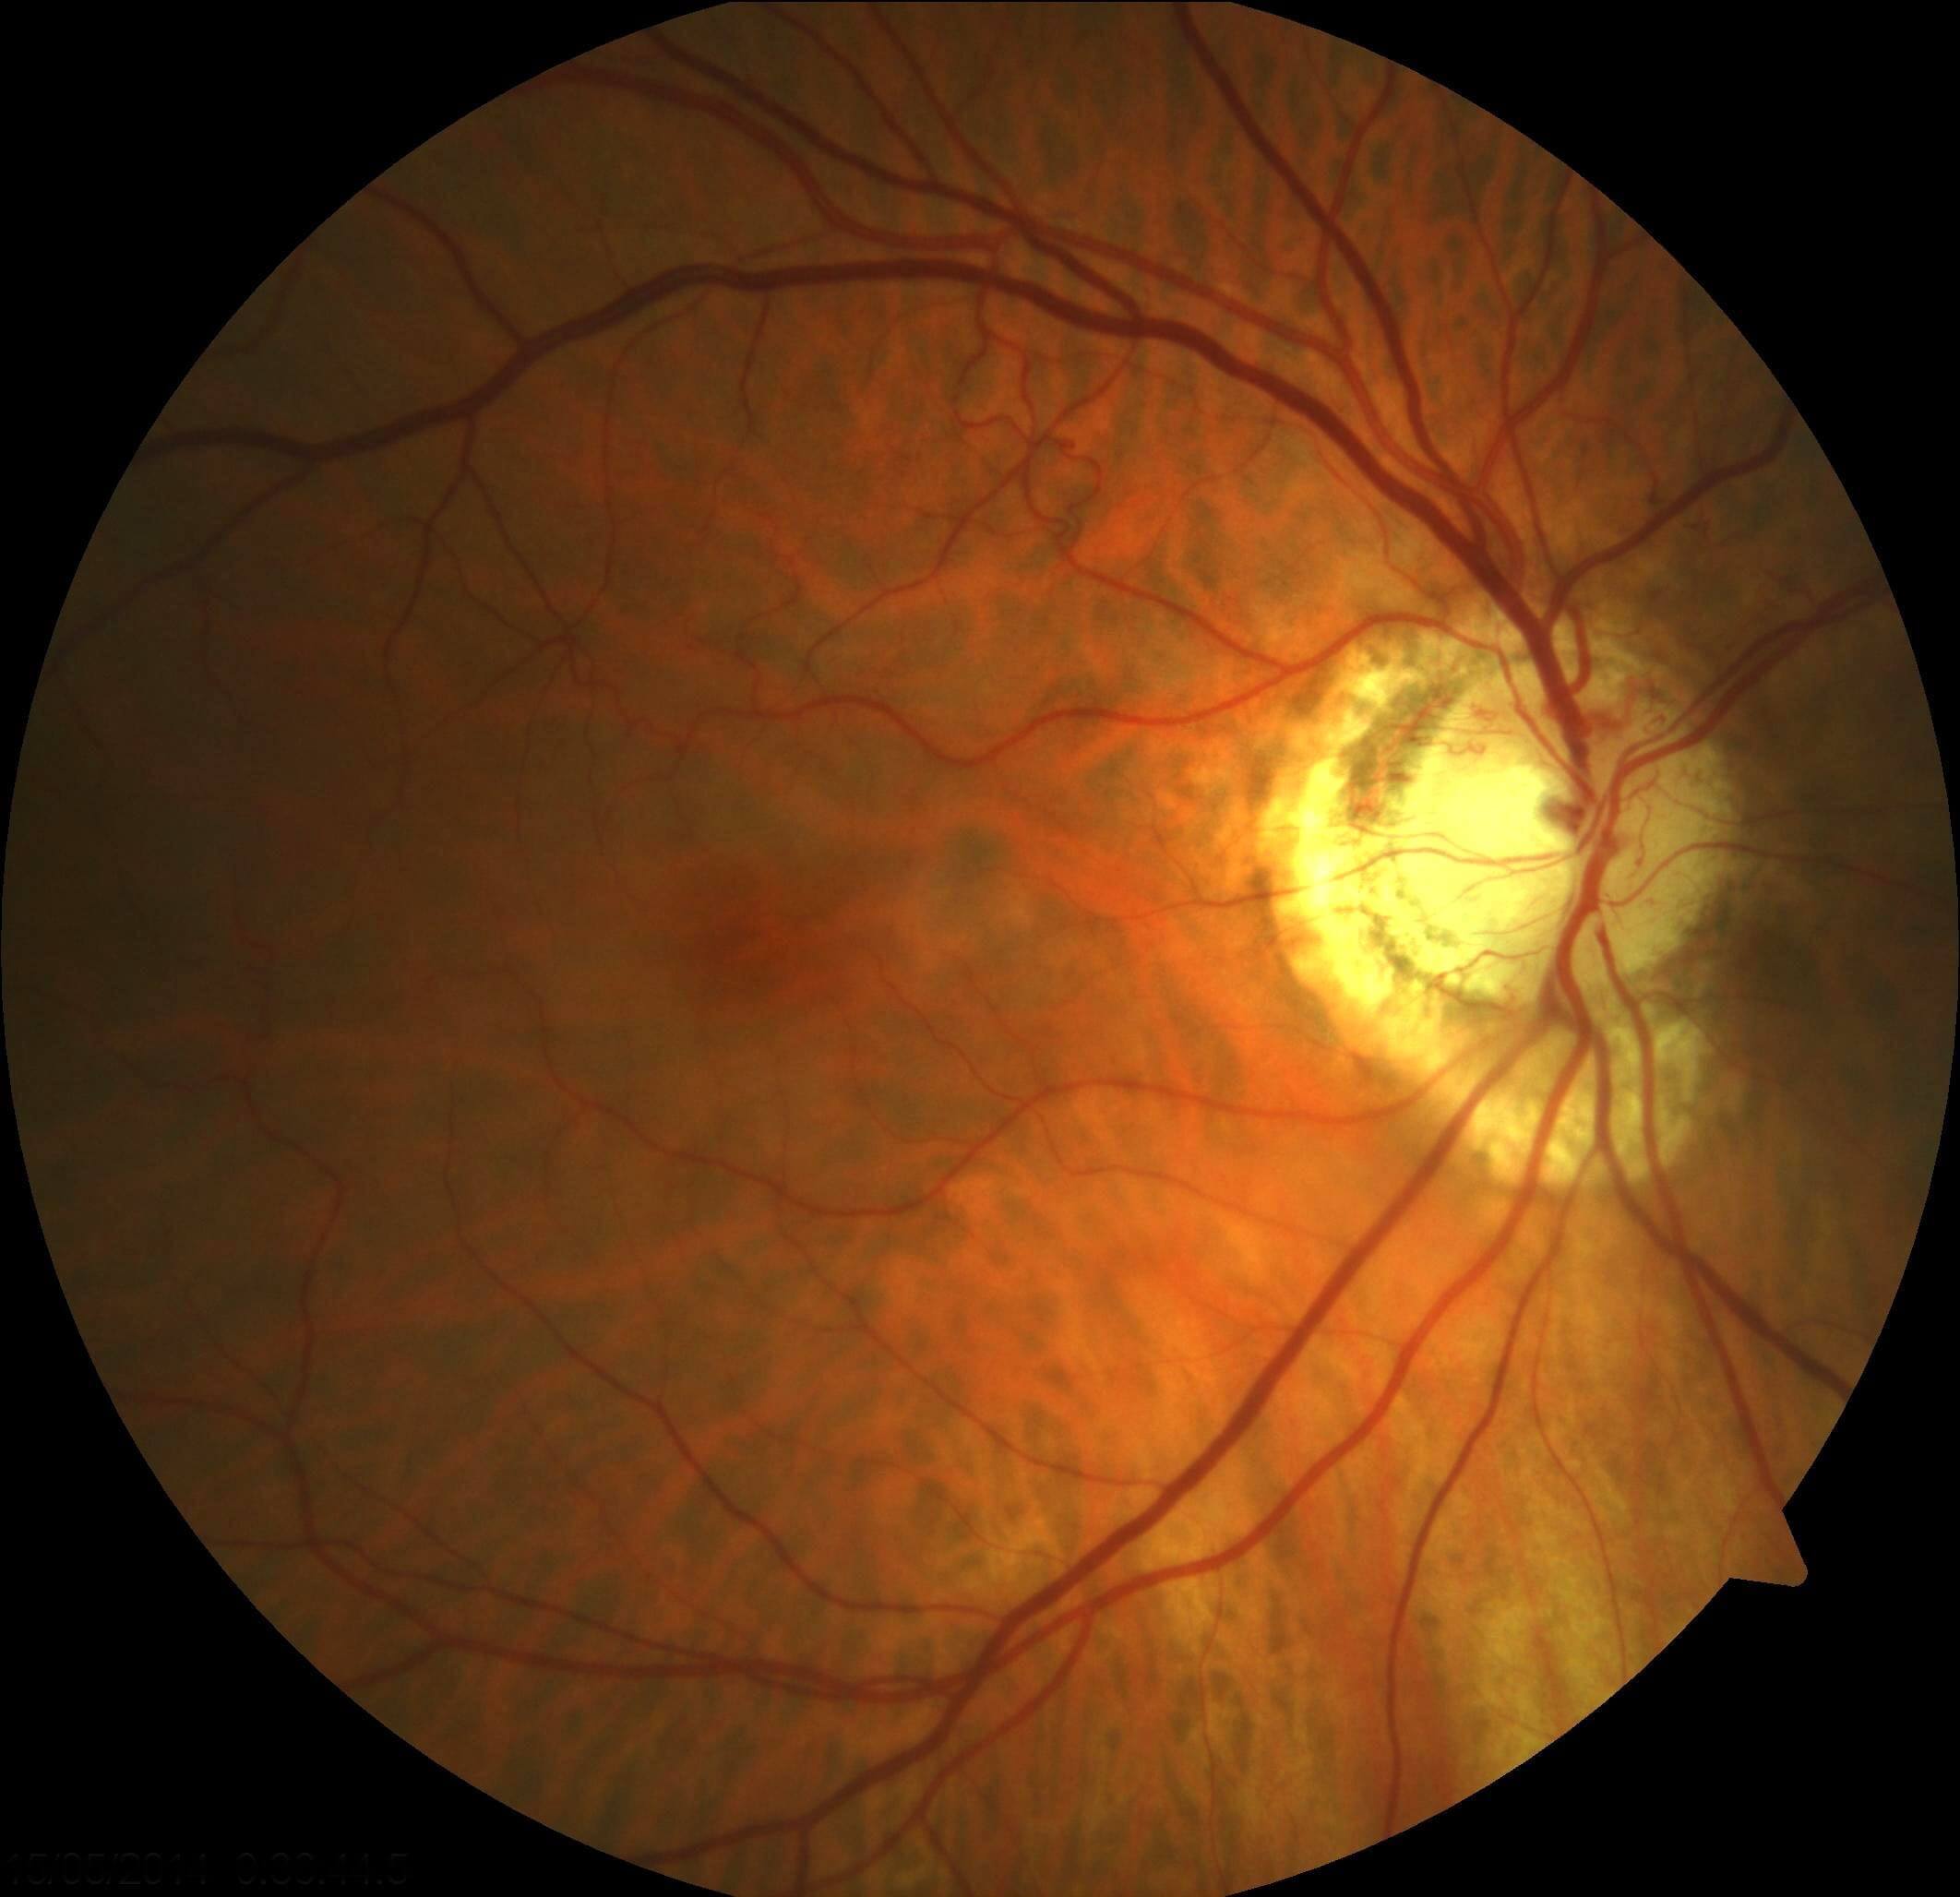 Three weeks after initial presentation there has been resolution of the retinal pallor and cherry red spot. The retinal emboli is still present, and the optic nerve is becoming pale (compared with Figure 1). Cilioretinal collateral vessels are present at the disc.